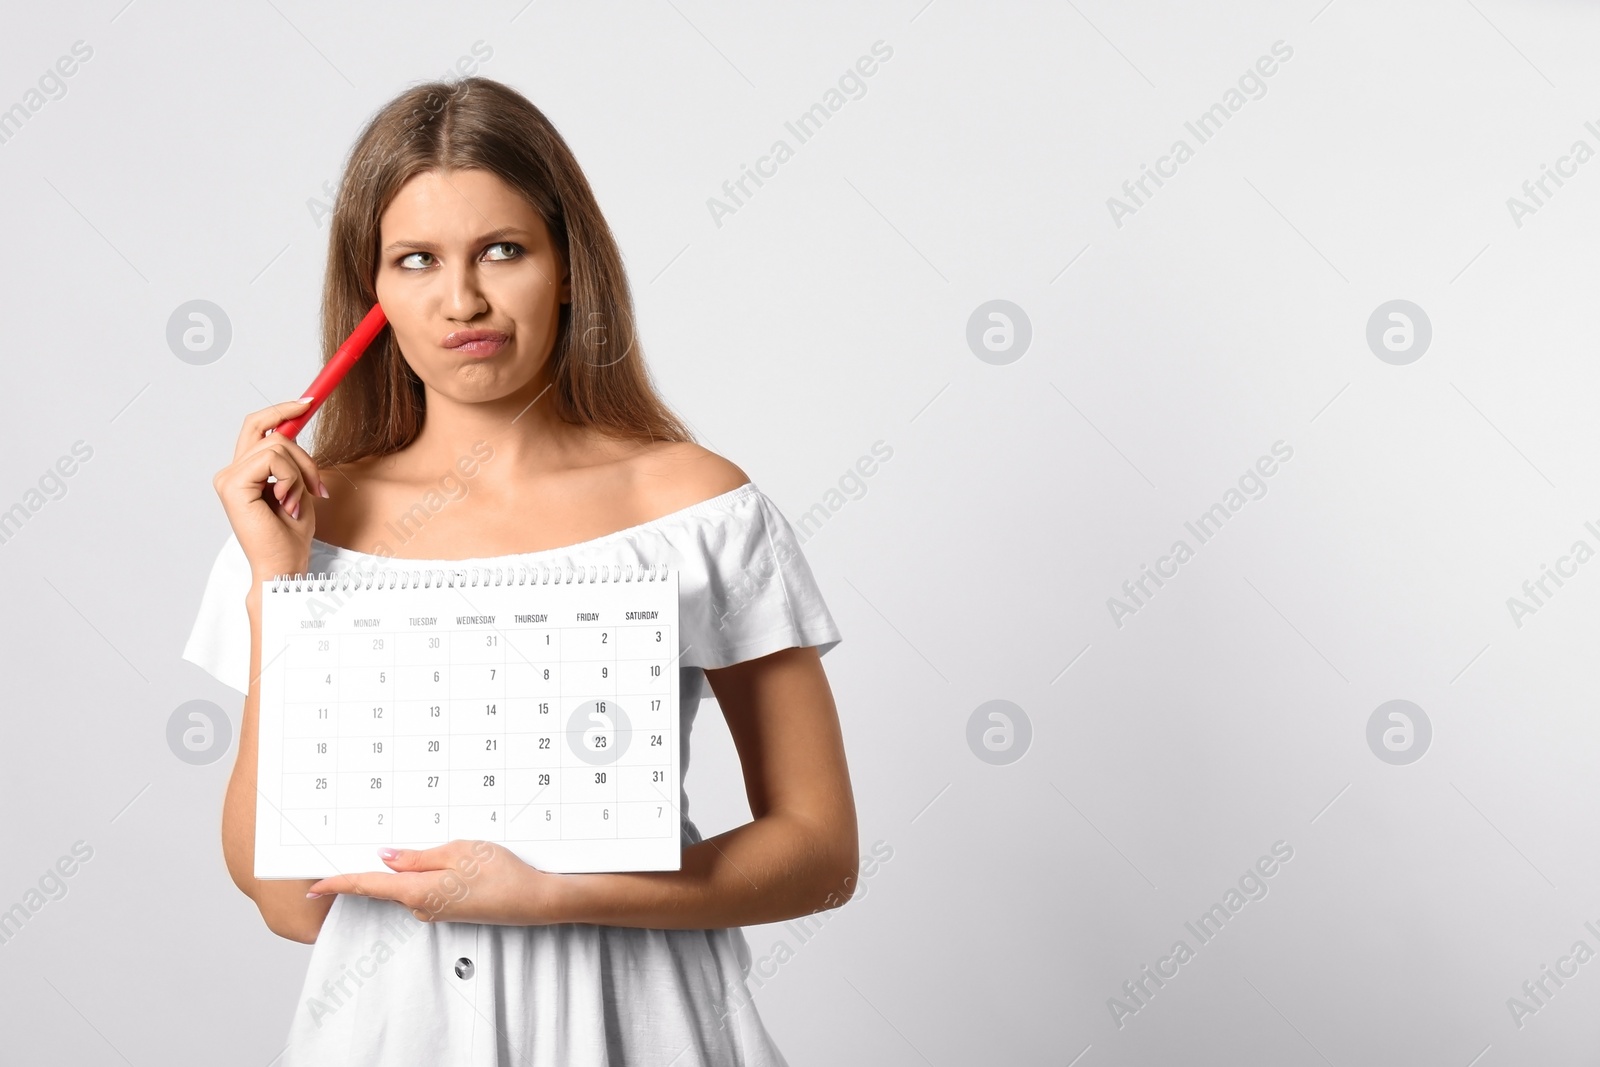 Photo of Pensive young woman holding calendar with marked menstrual cycle days on light background. Space for text